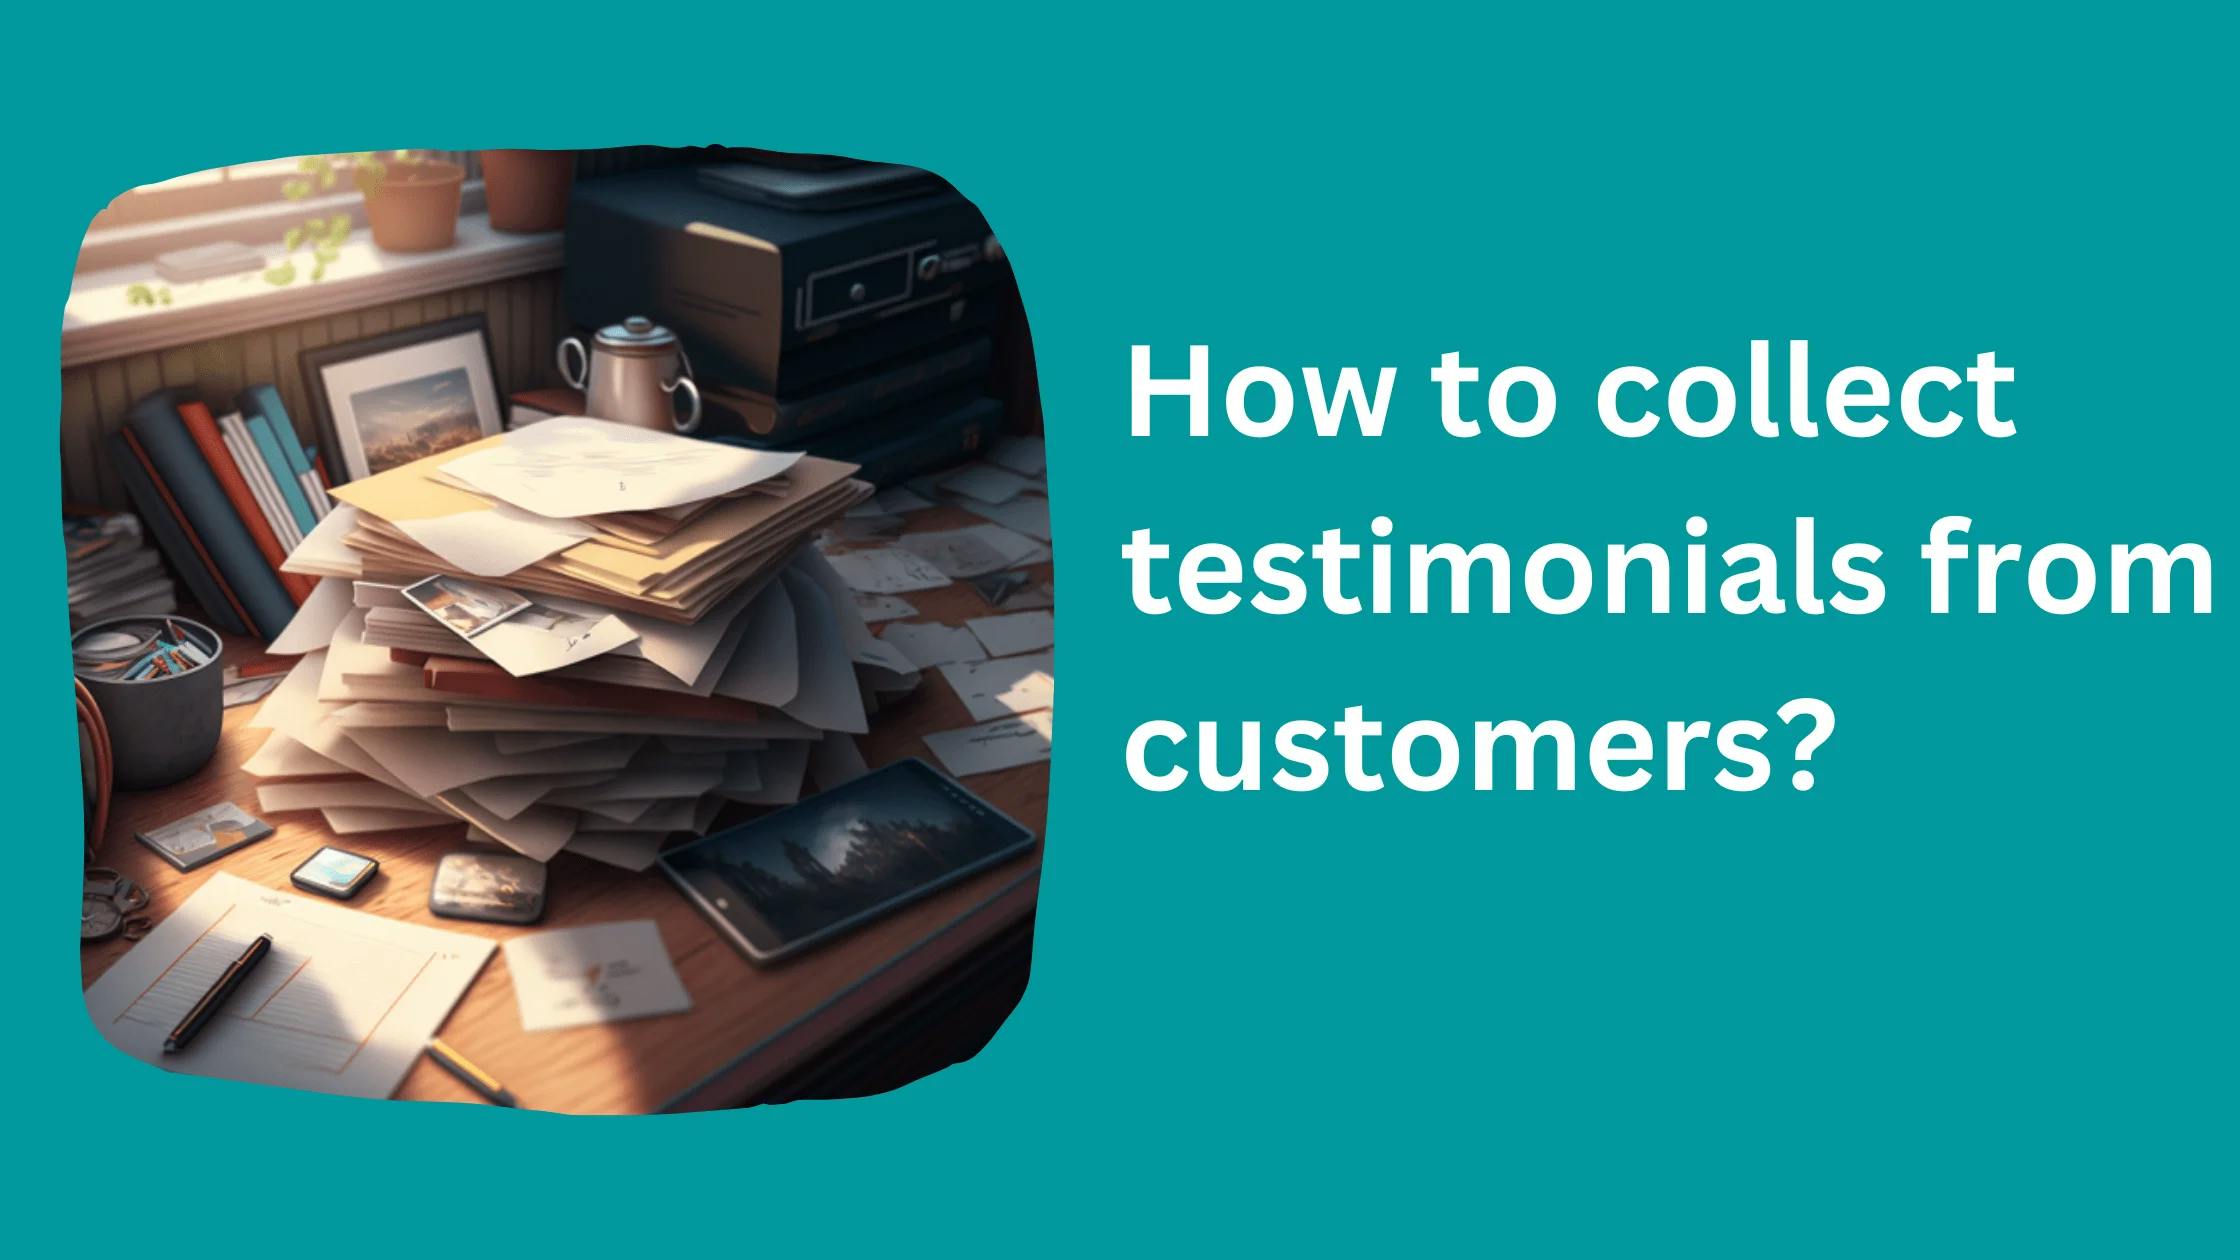 How to collect testimonials from customers?